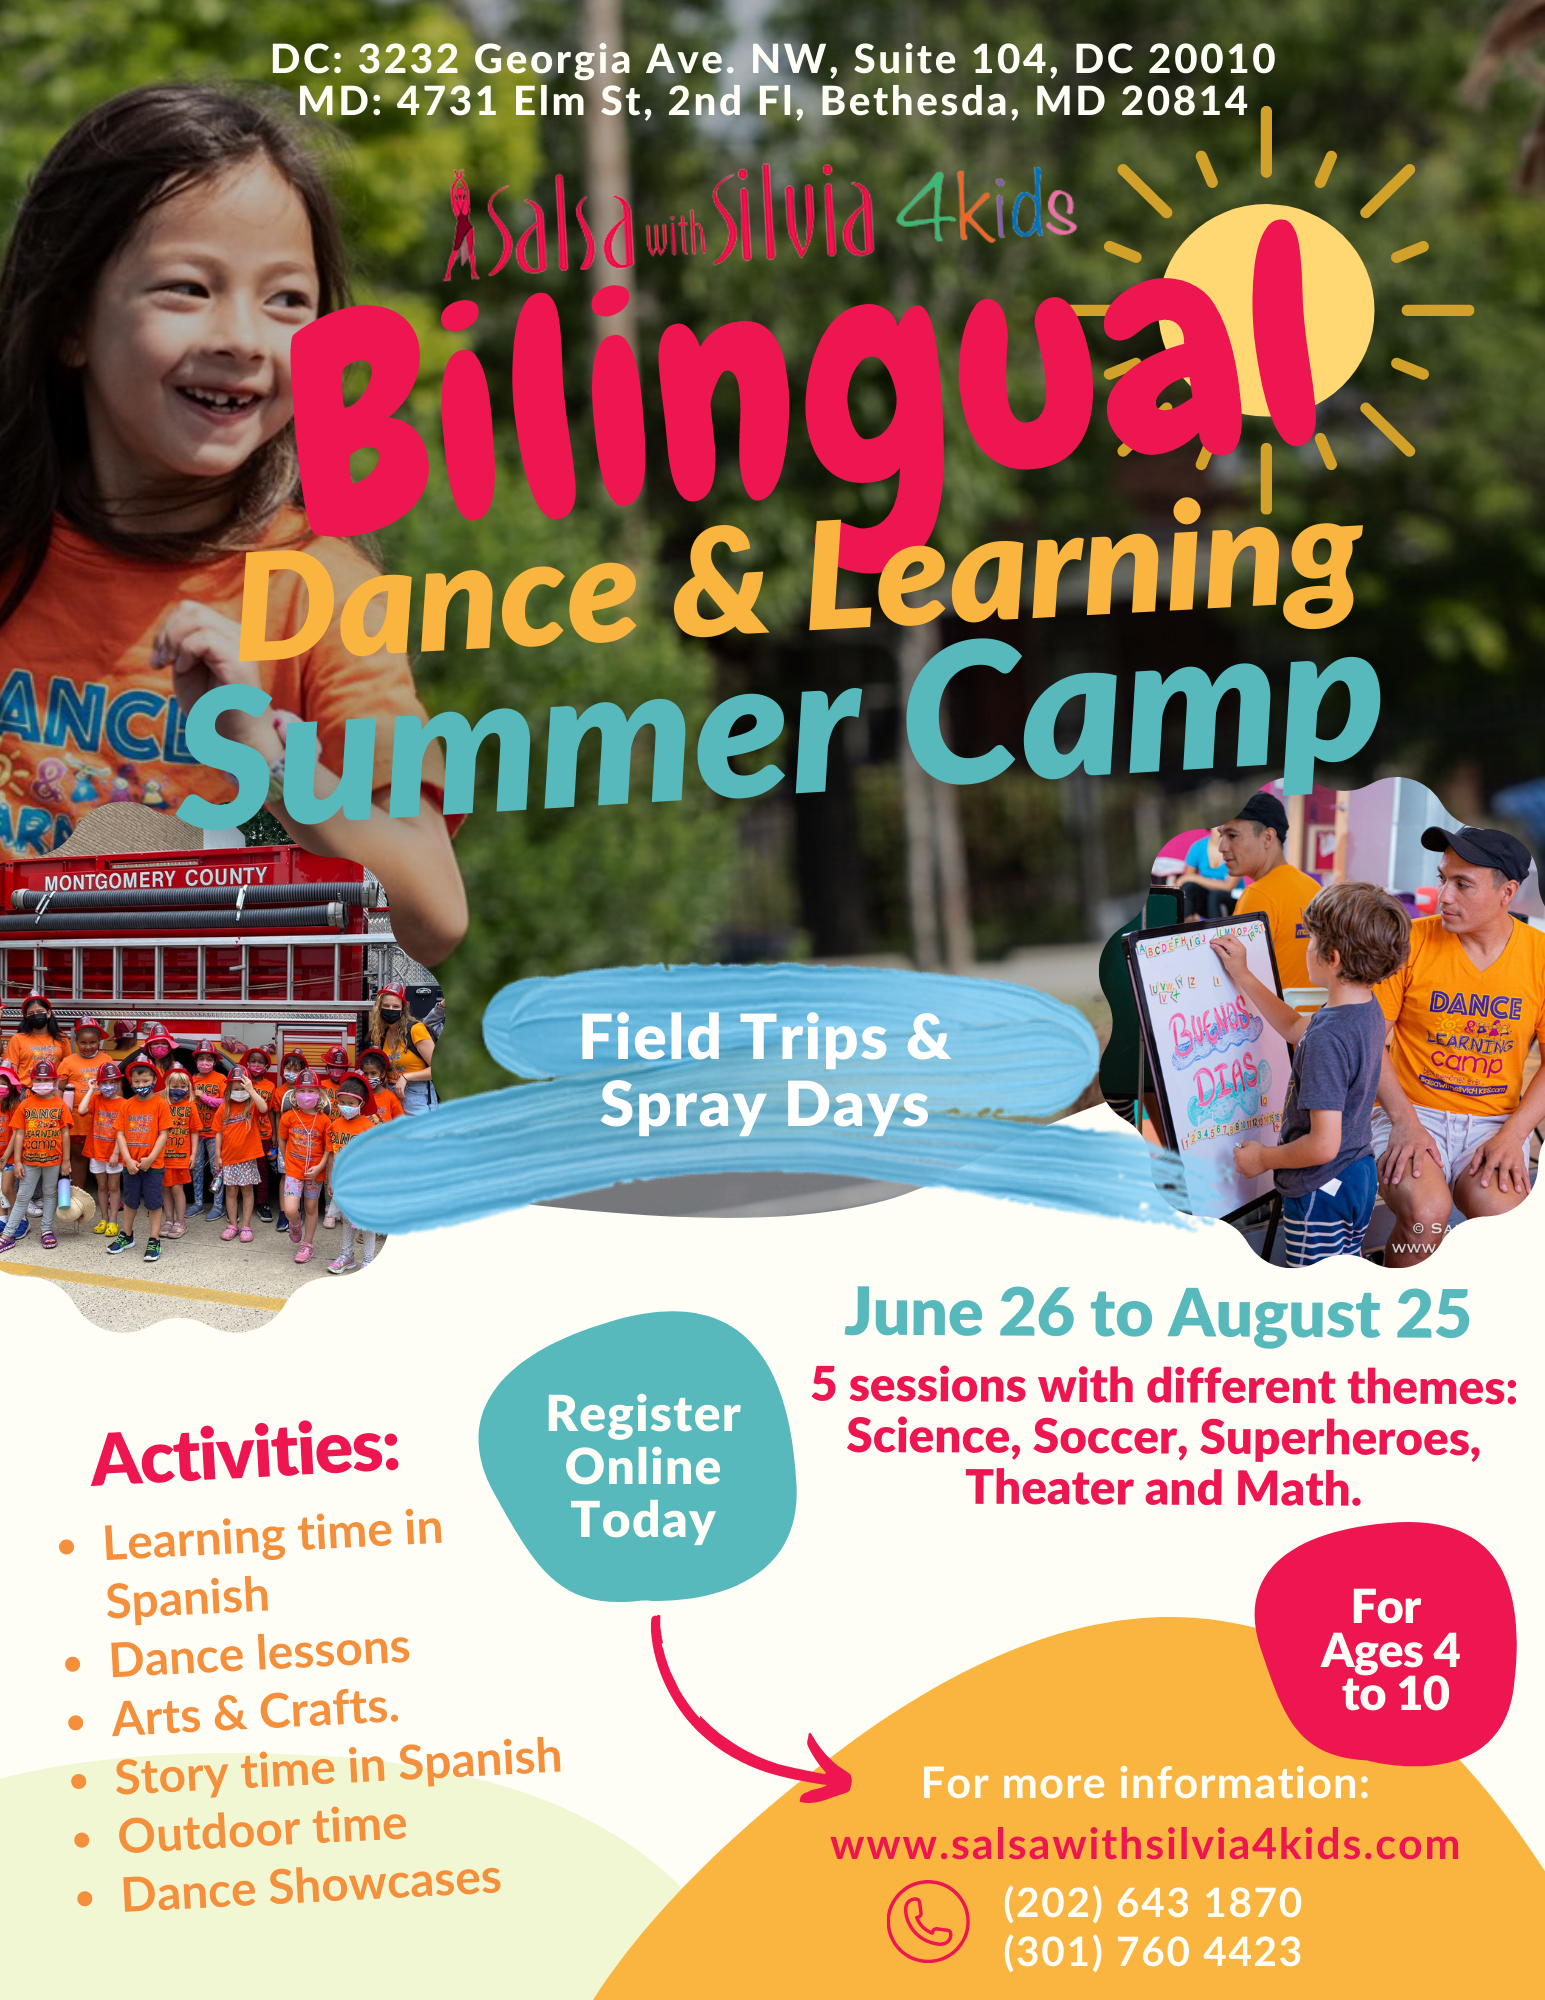 Summer Camp 2023 - Bilingual Dance and Learning camp at the Salsa with Silvia dance studio in DC and Bethesda